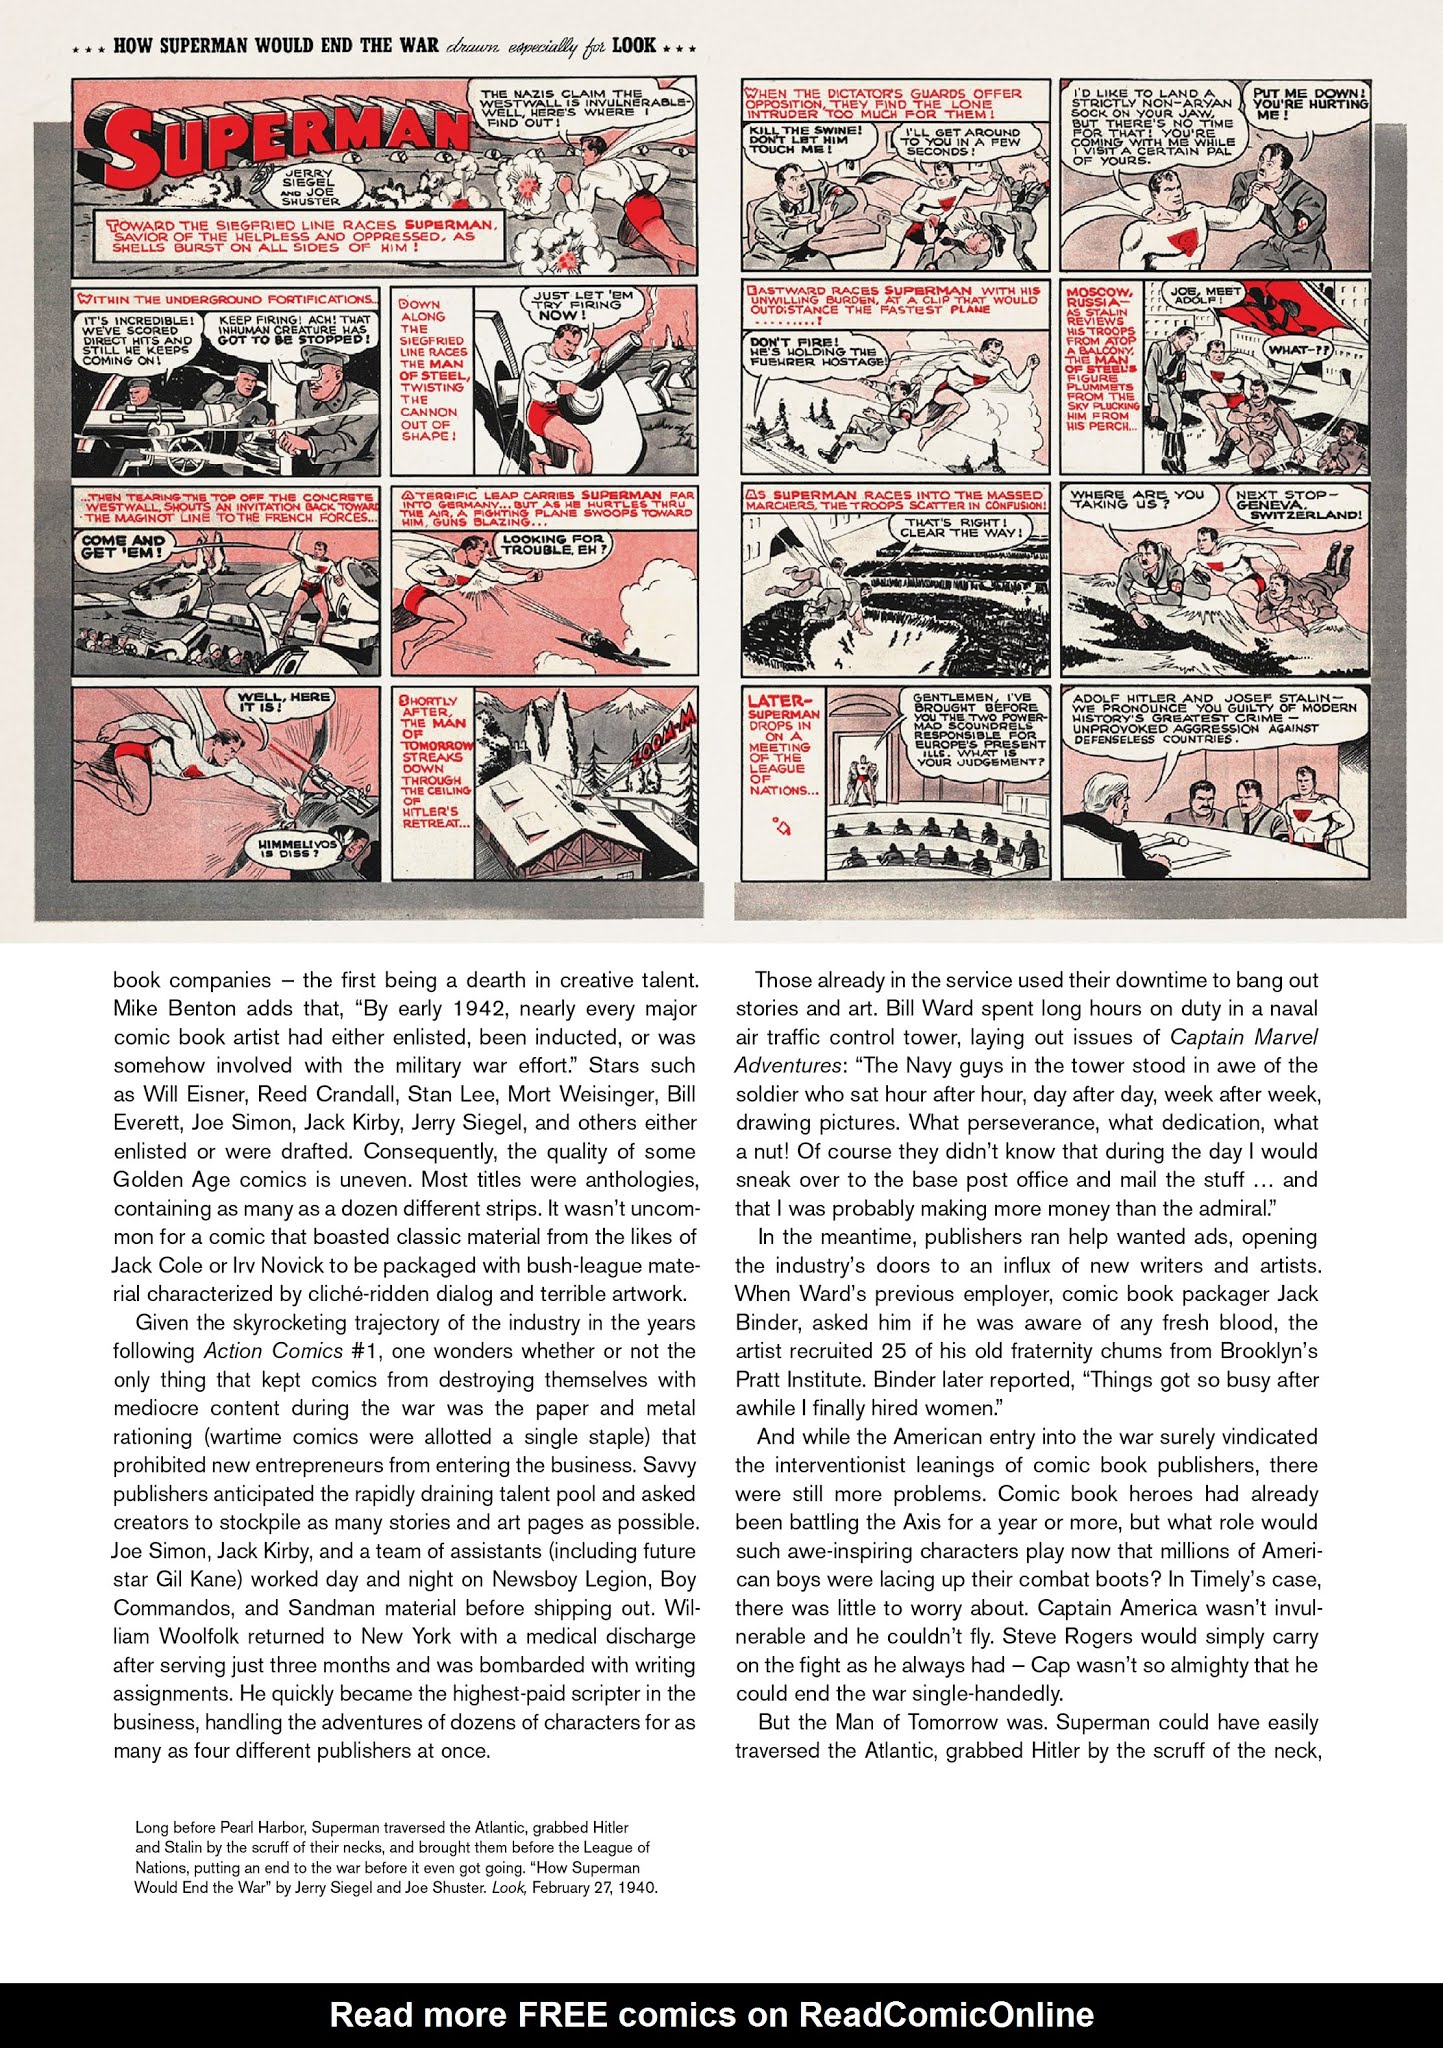 Read online Take That, Adolf!: The Fighting Comic Books of the Second World War comic -  Issue # TPB (Part 1) - 33